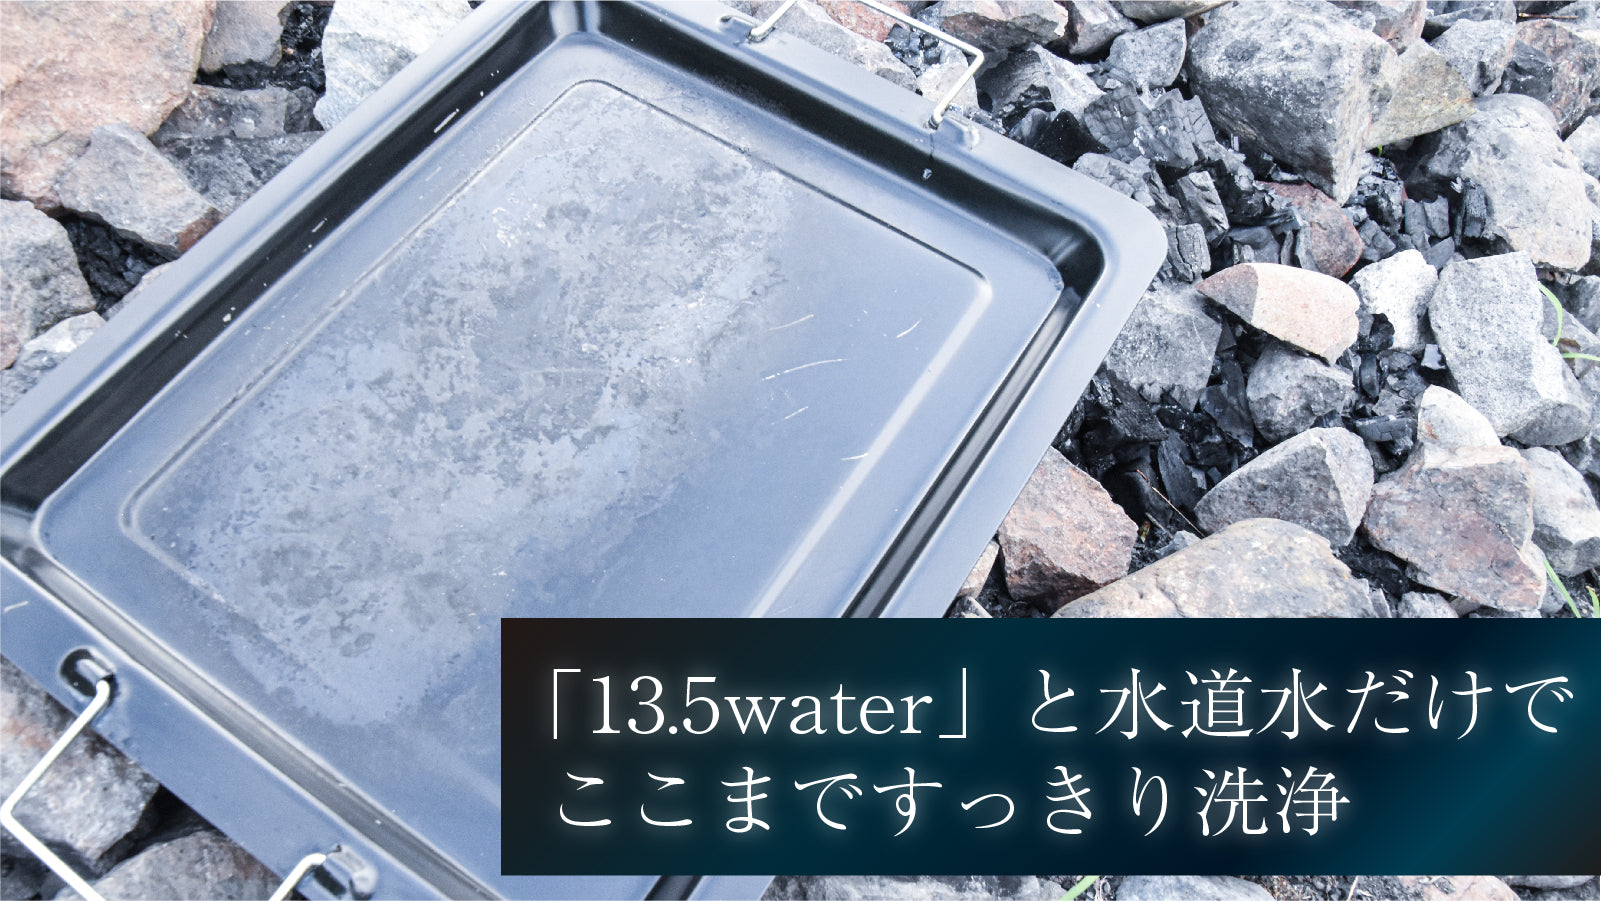 13.5water【300ml】2本セット